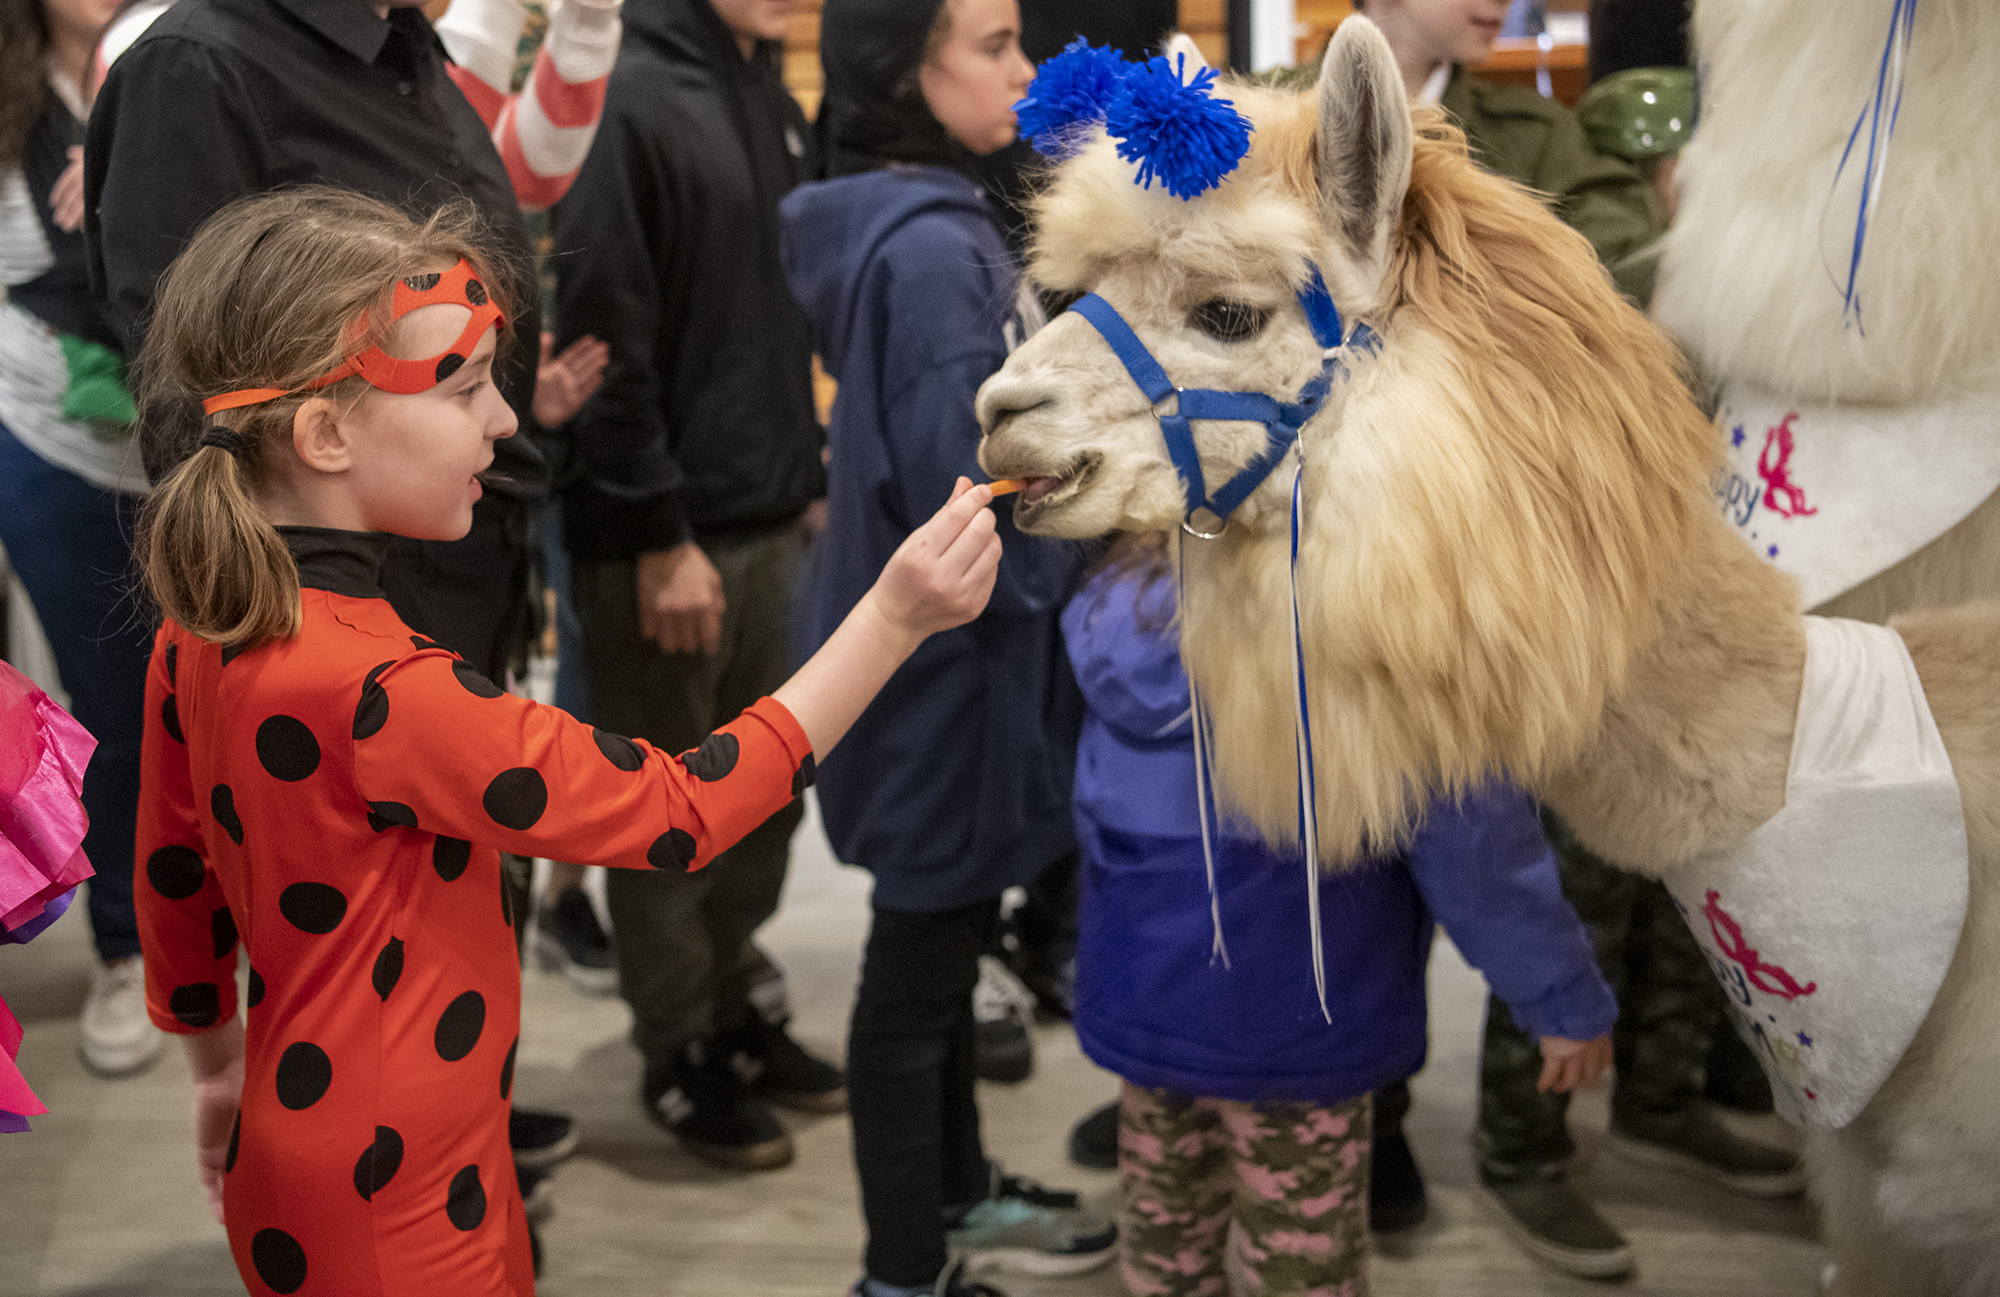 Arielle Kehoe, 6, of Camas, feeds a carrot stick to Napoleon, an alpaca from Mtn Peaks Therapy Llamas and Alpacas, on Tuesday, March 7, 2023, during a Purim celebration at the Chabad Jewish Center in Vancouver.